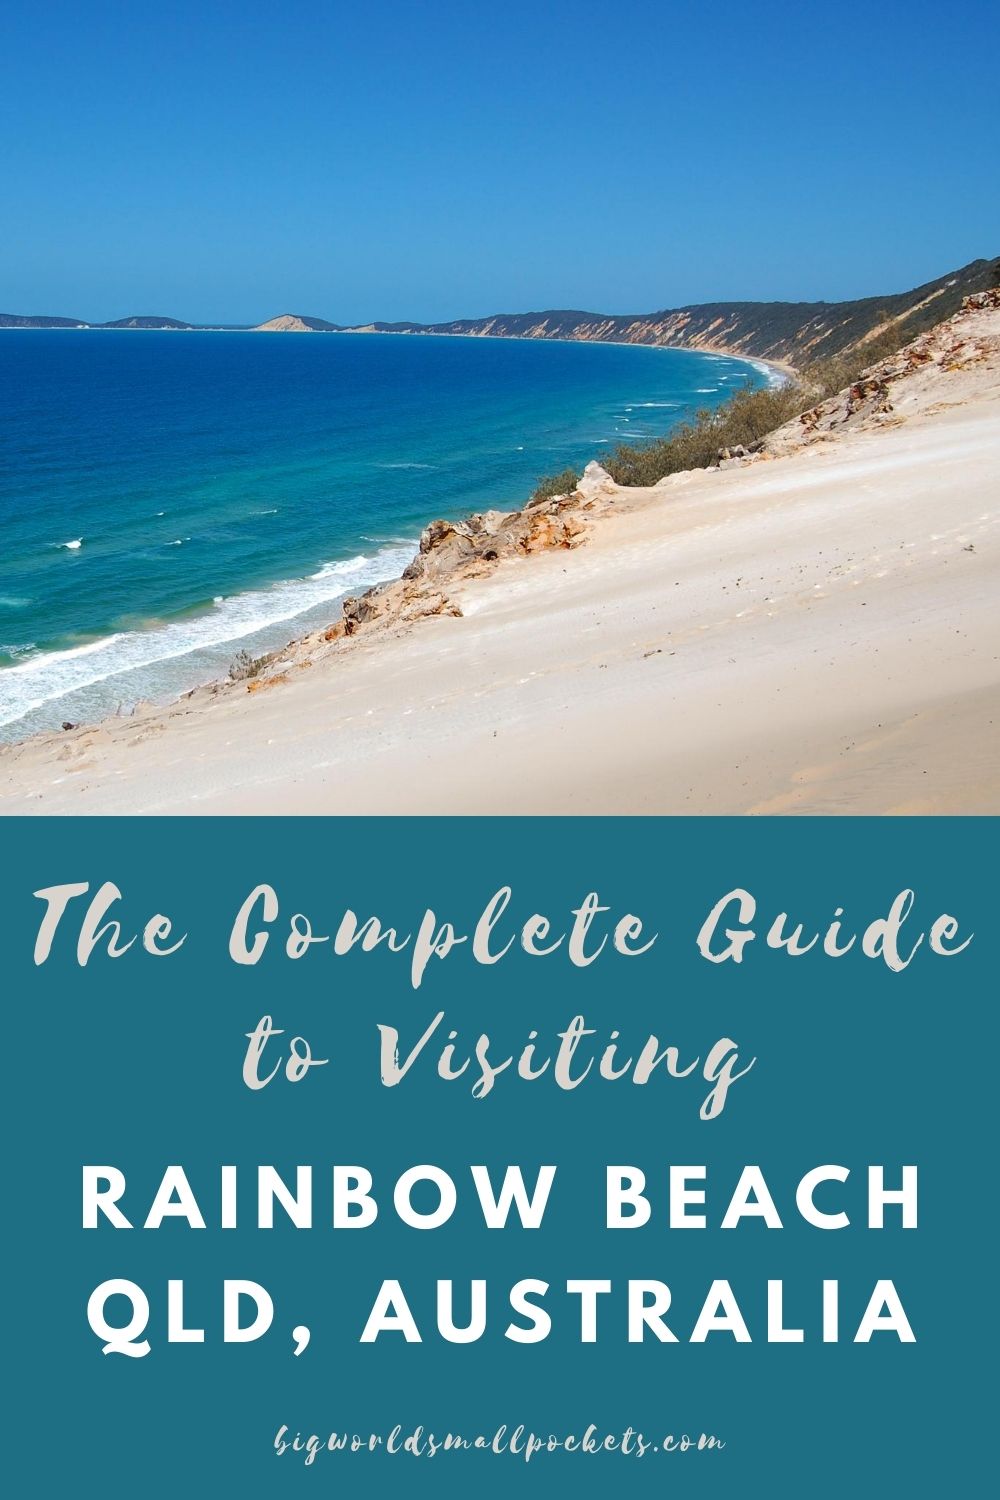 The Complete Travel Guide to Rainbow Beach, Queensland, Australia